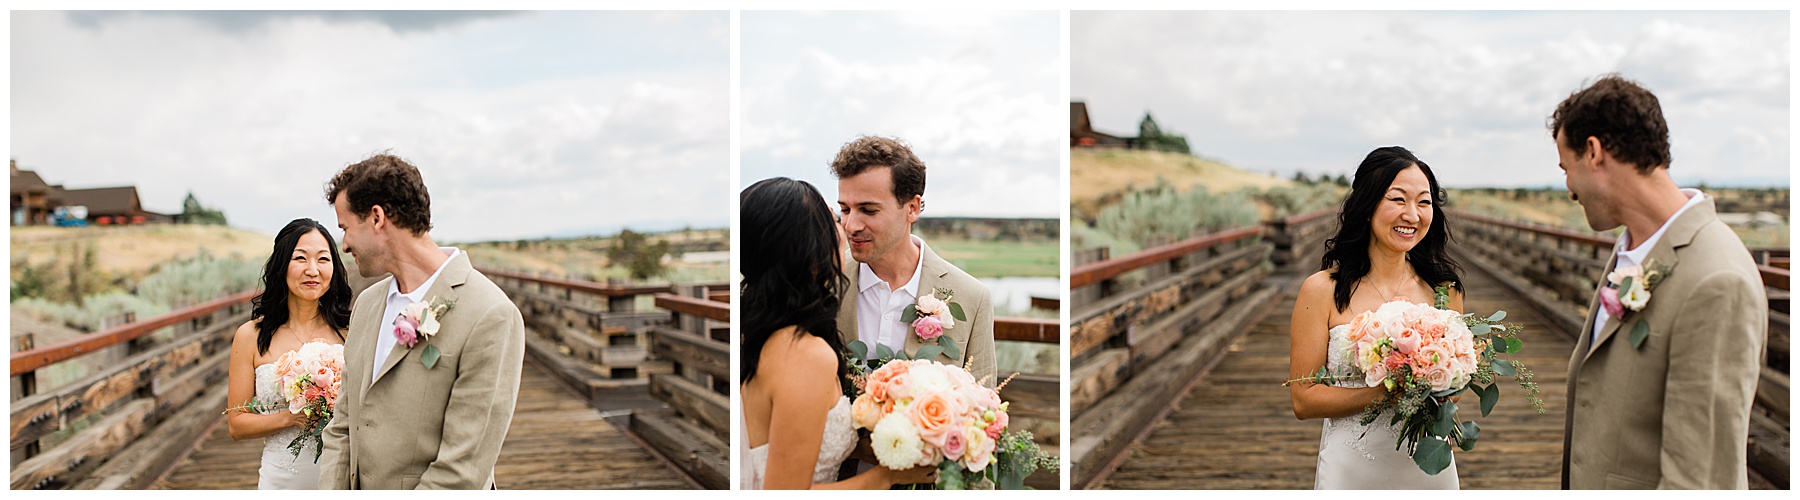 Iris and Andy share their first look at the Brasada Ranch Bend Oregon Resort.